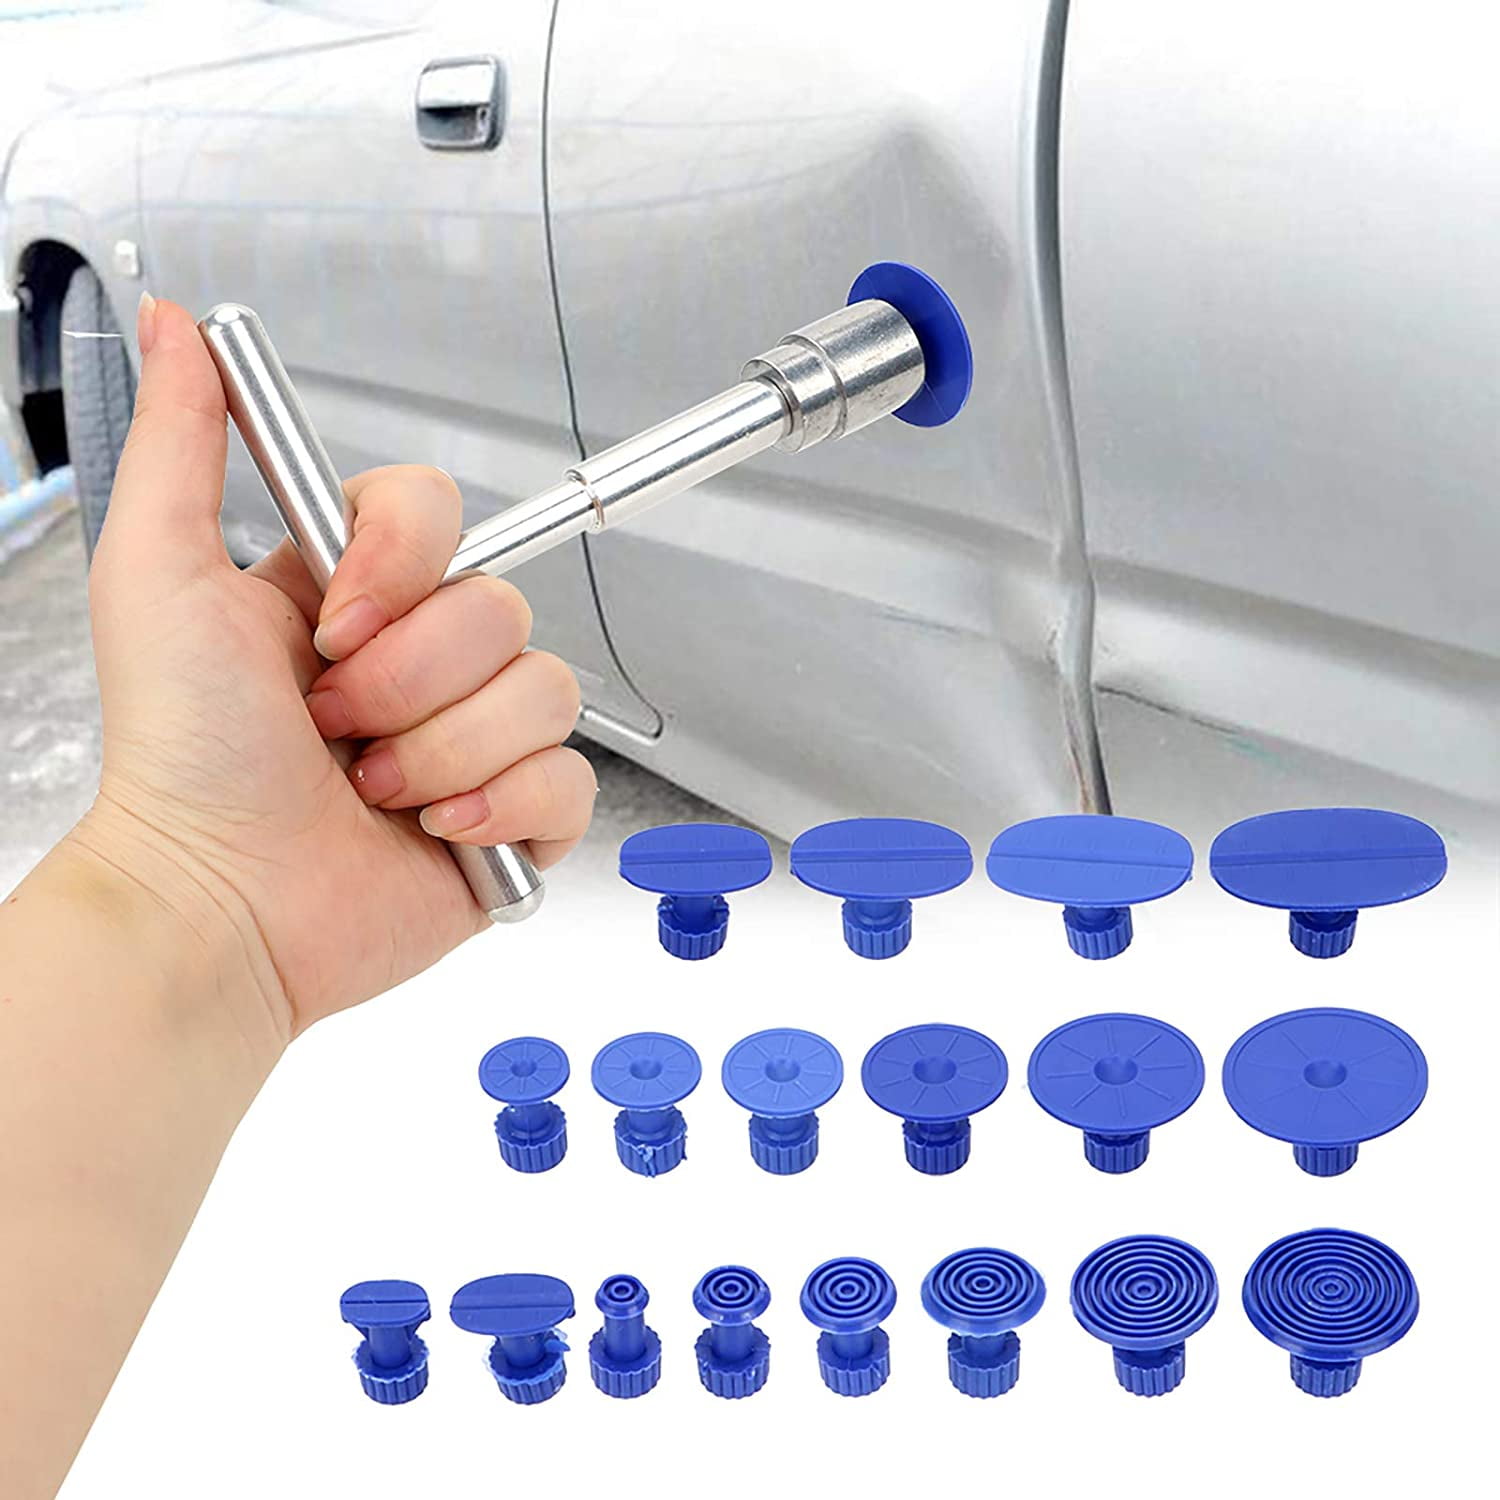 Car SUV Dent Repair Puller Pull Body Panel Ding Remover Sucker Suction Cup Tool 